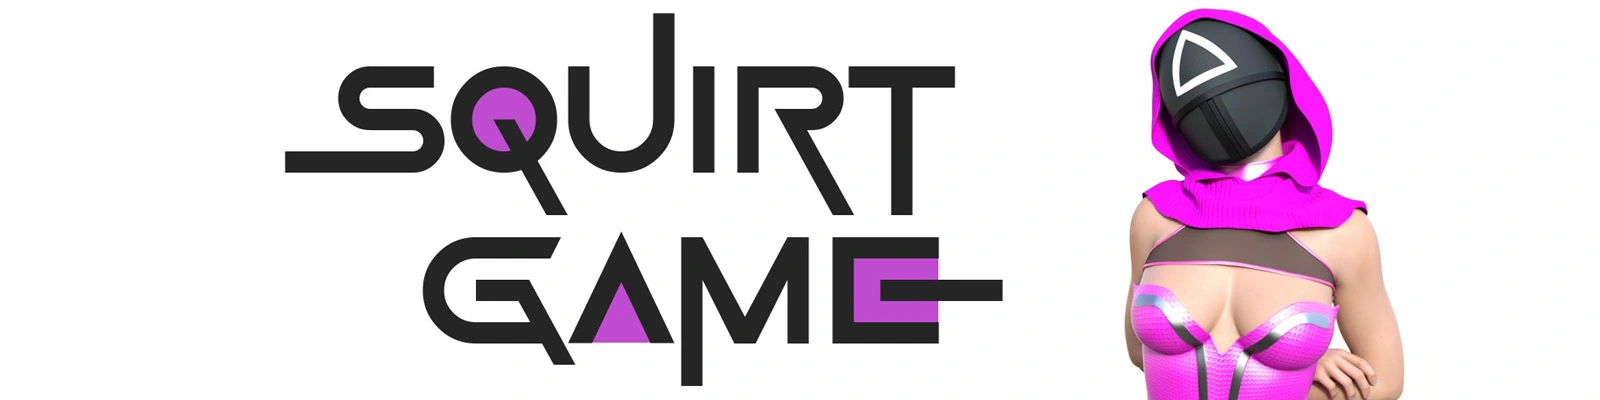 Squirt Game main image